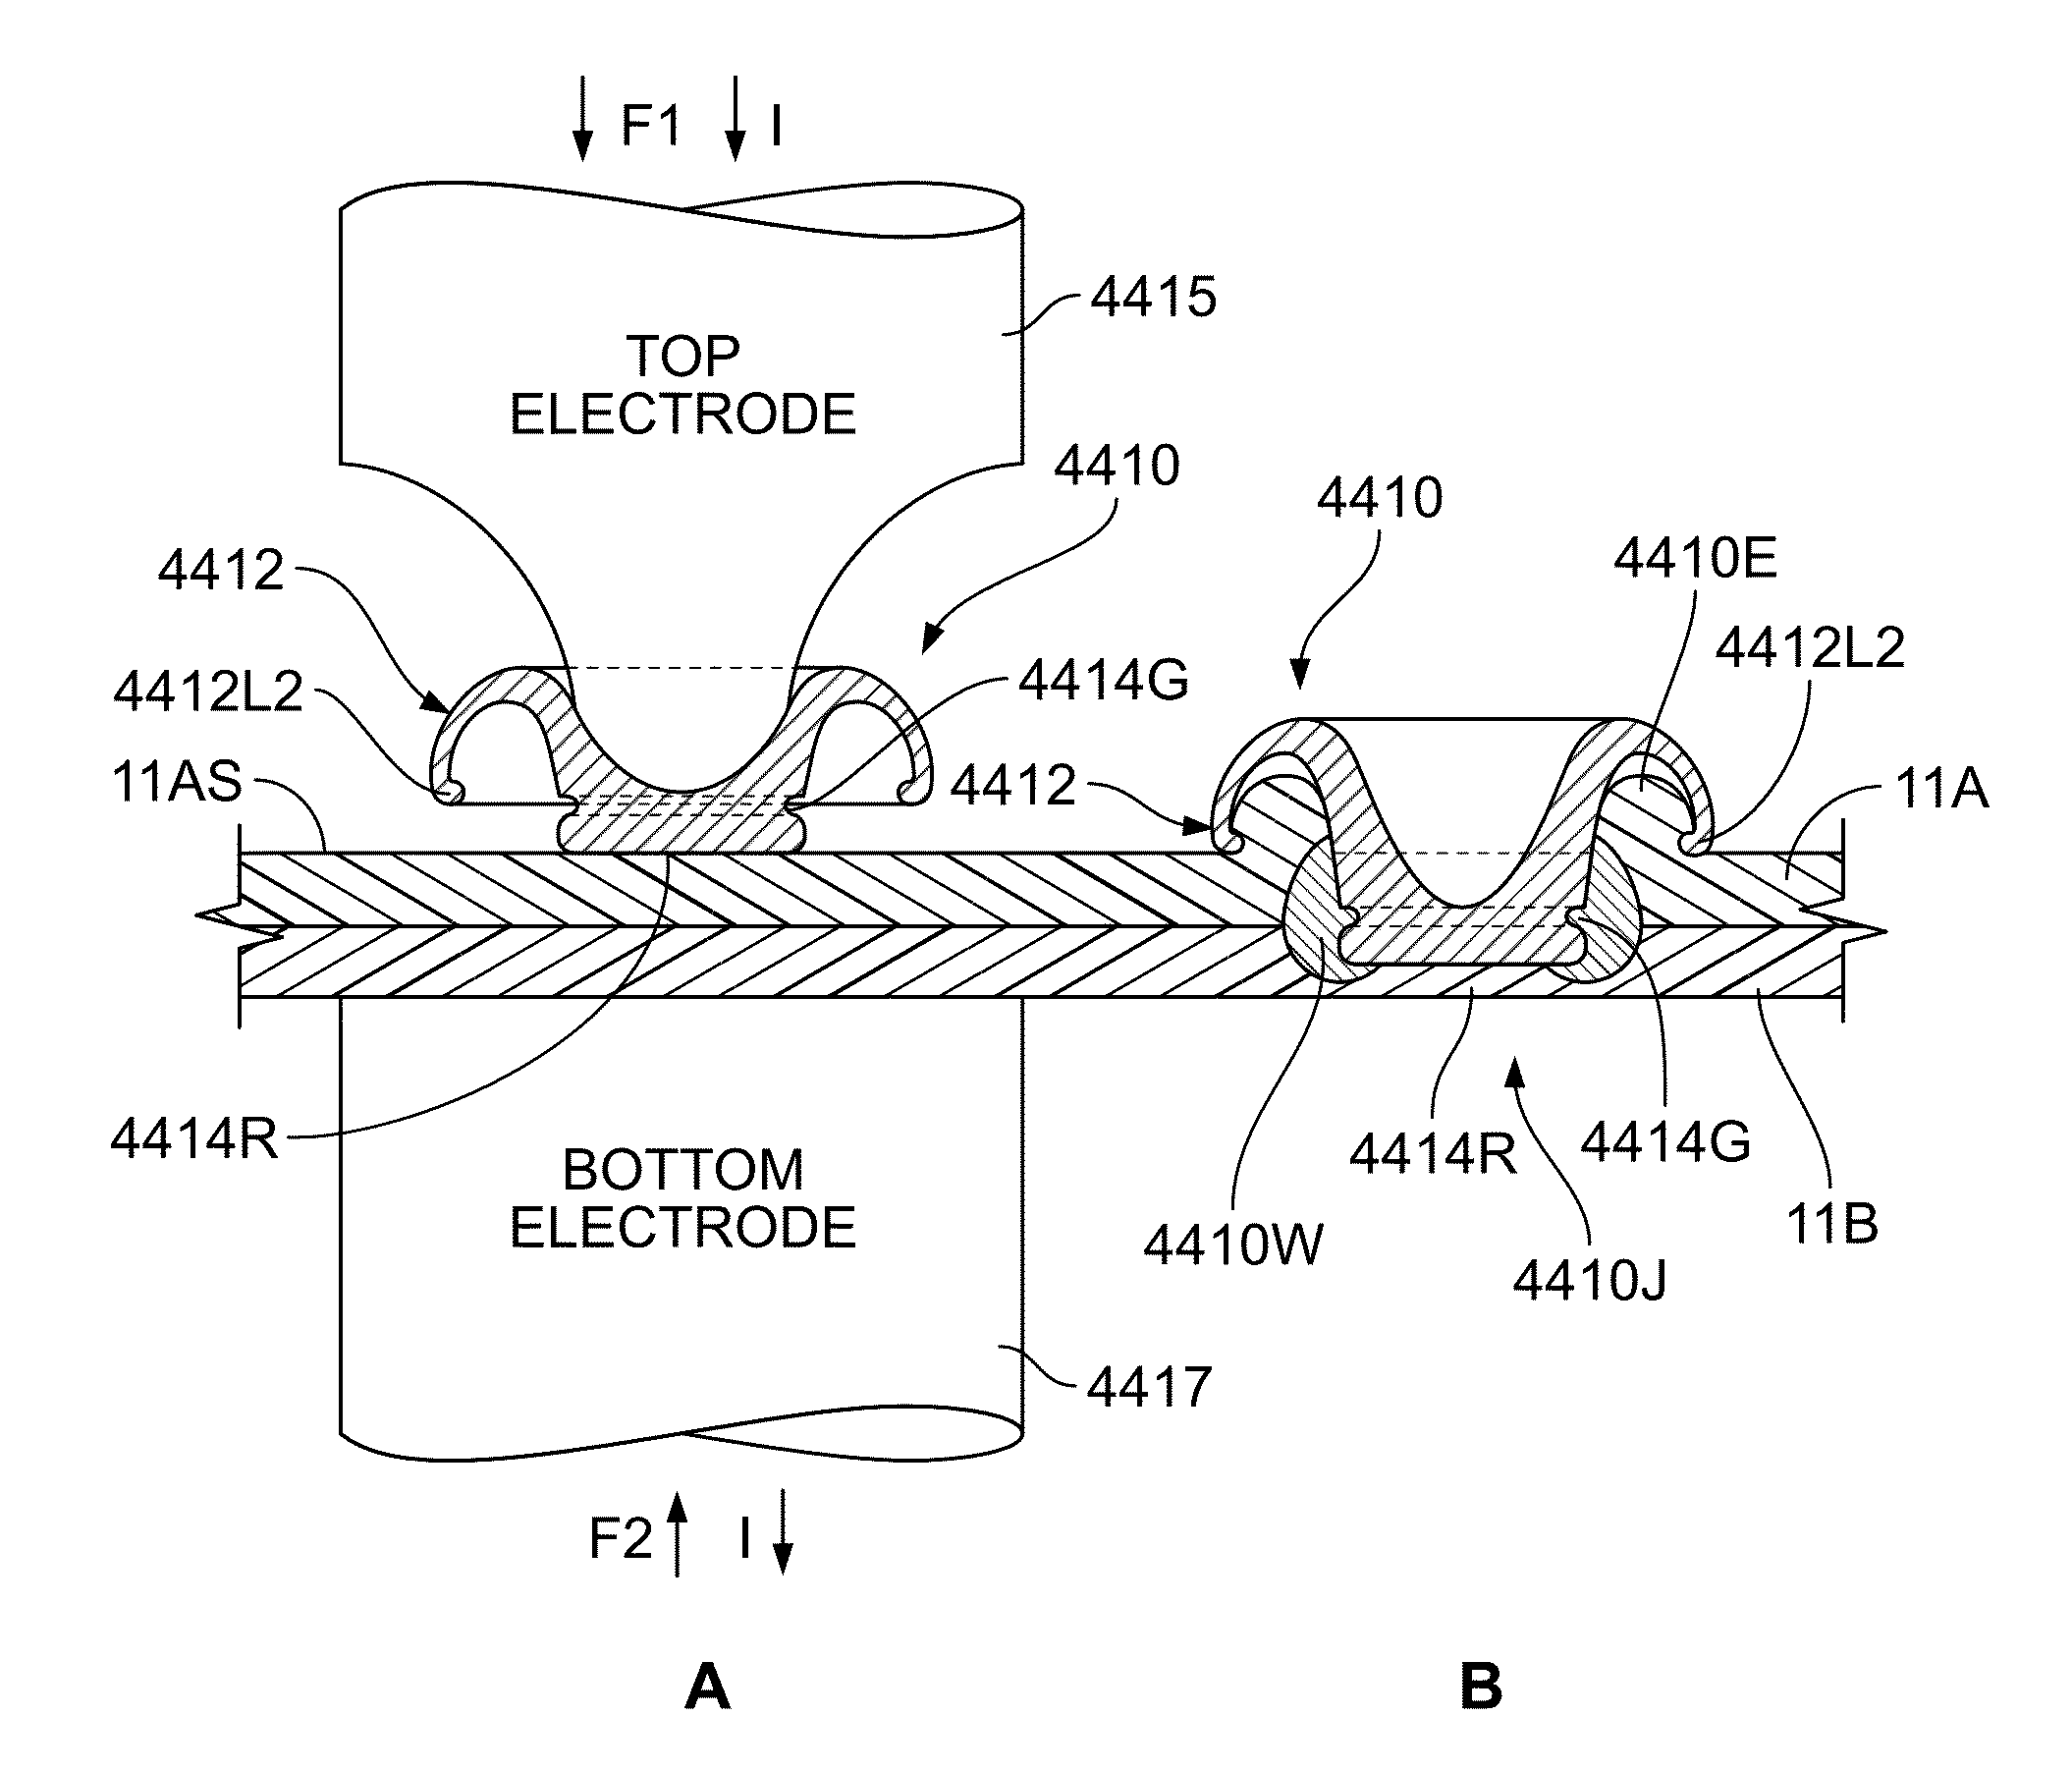 Resistance welding fastener, apparatus and methods for joining similar and dissimilar materials